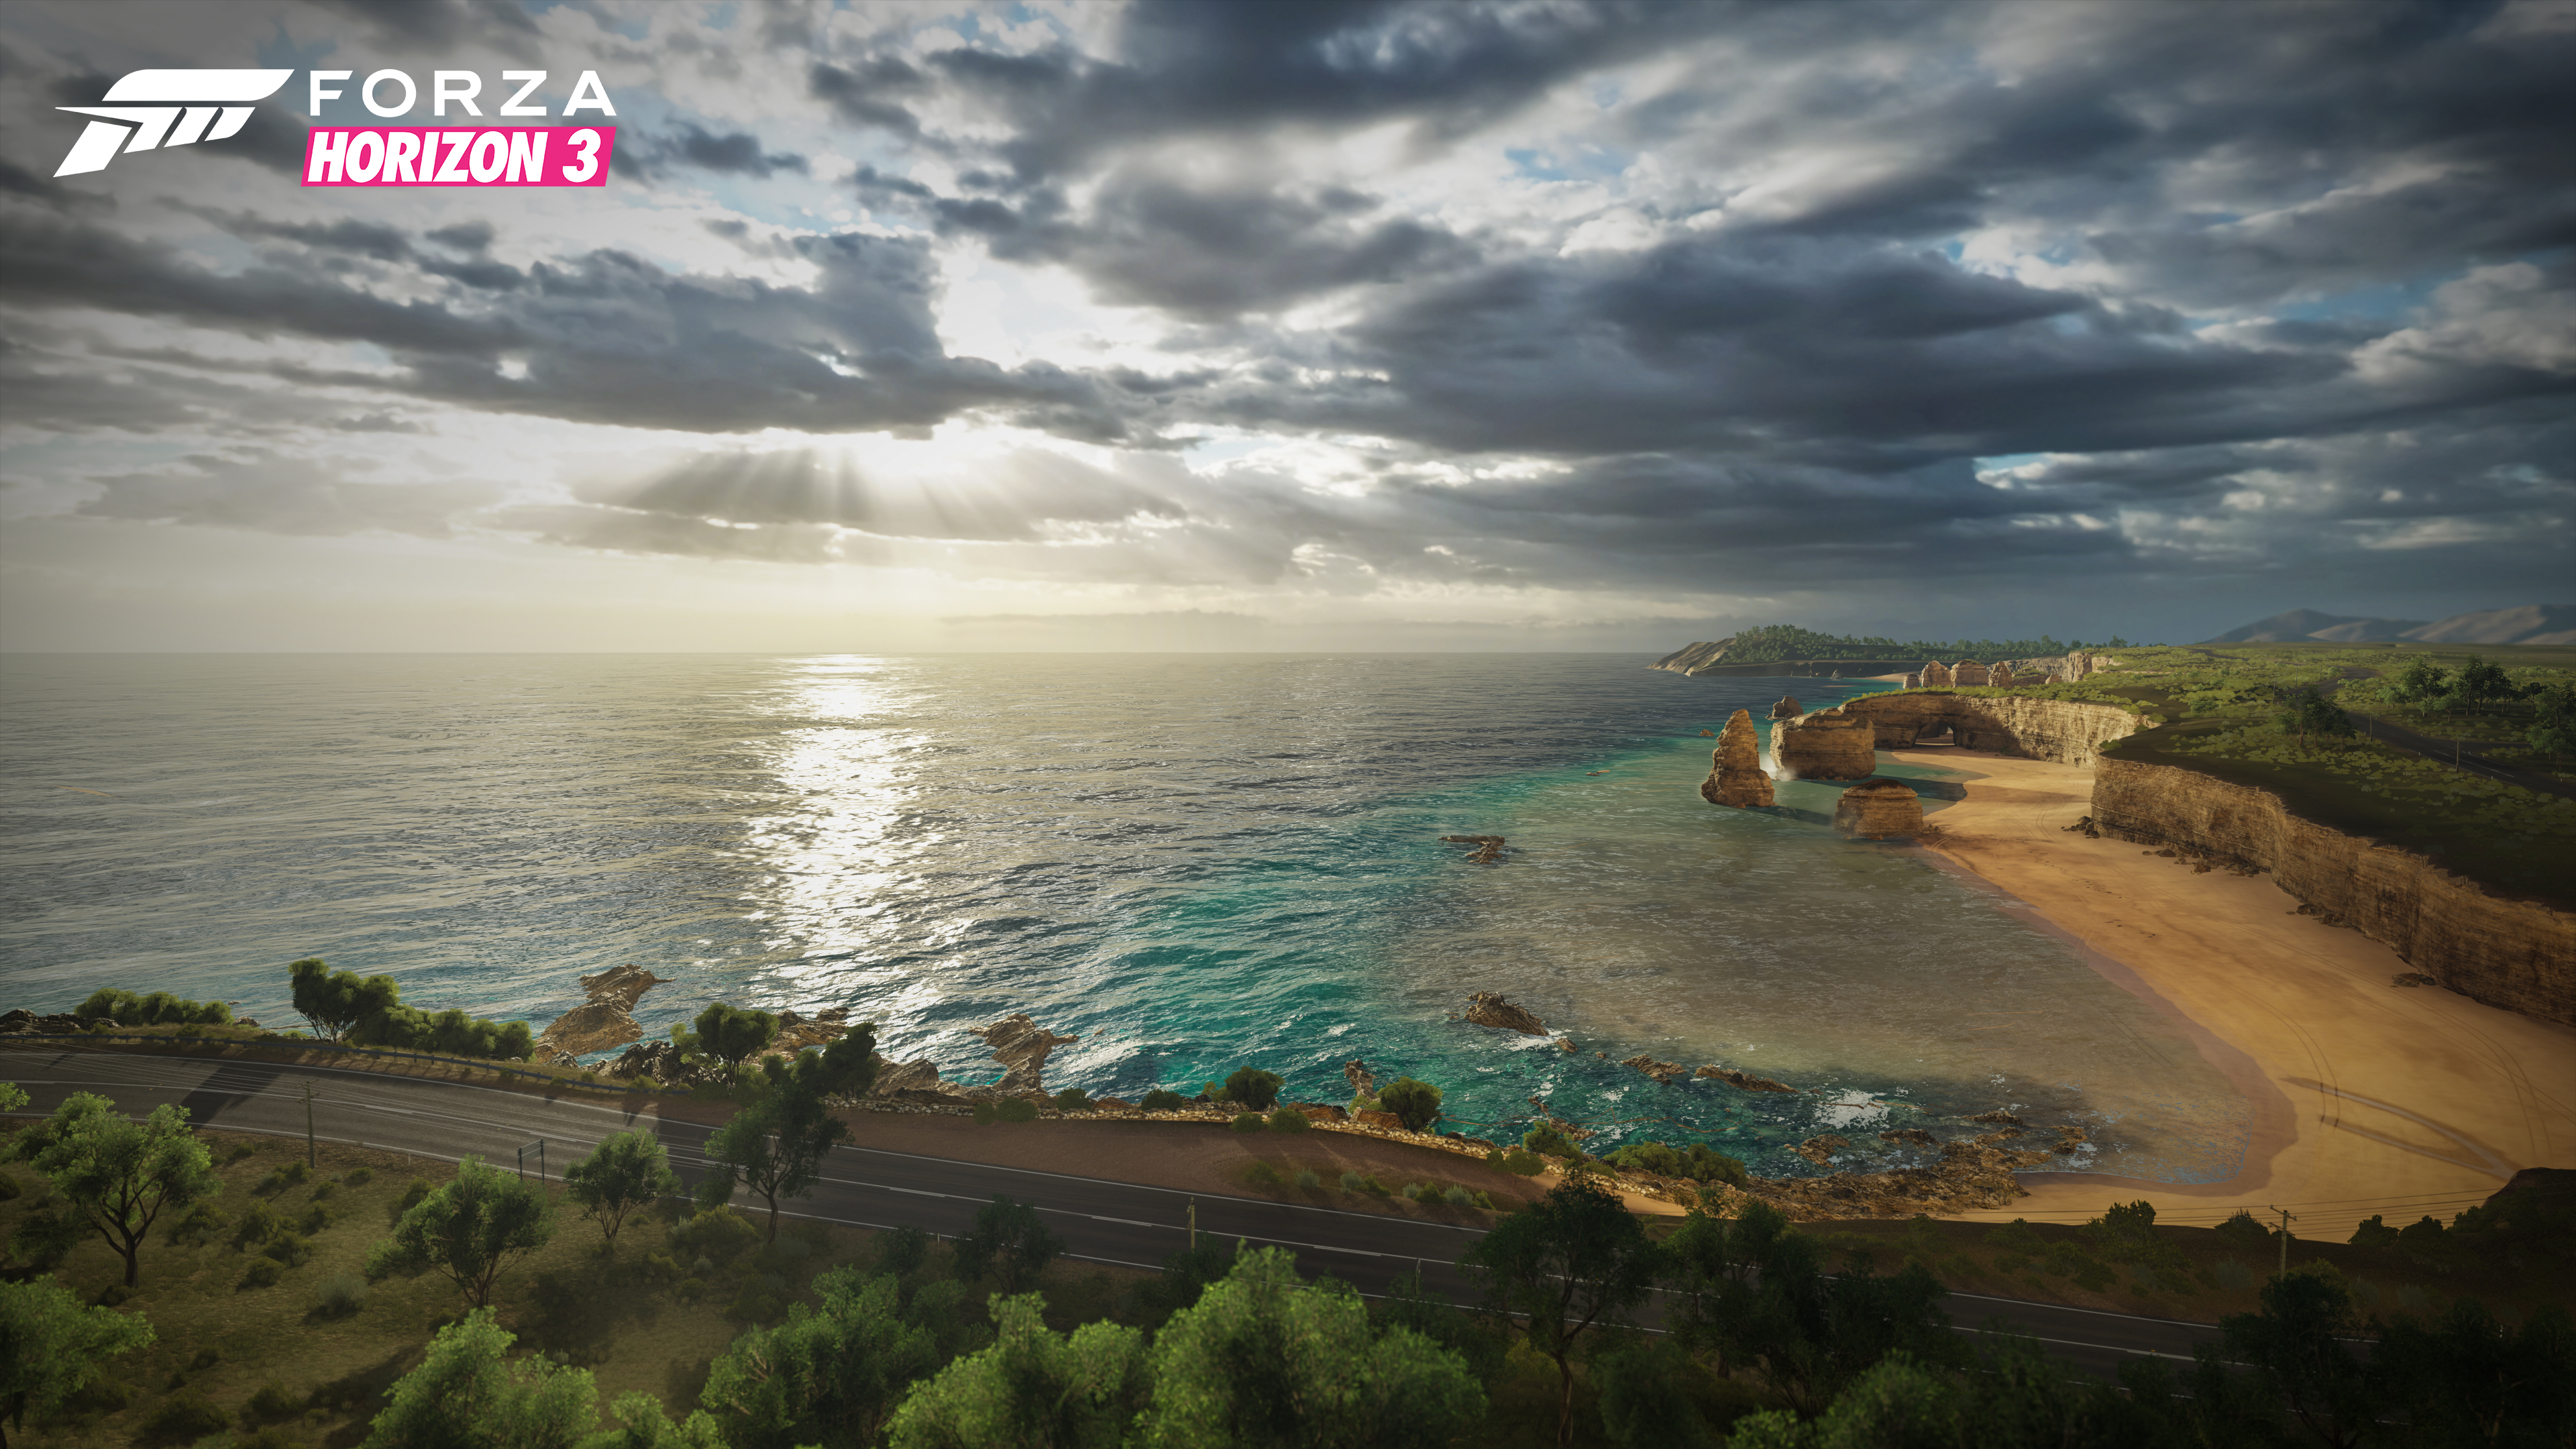 Forza Horizon 3 system requirements